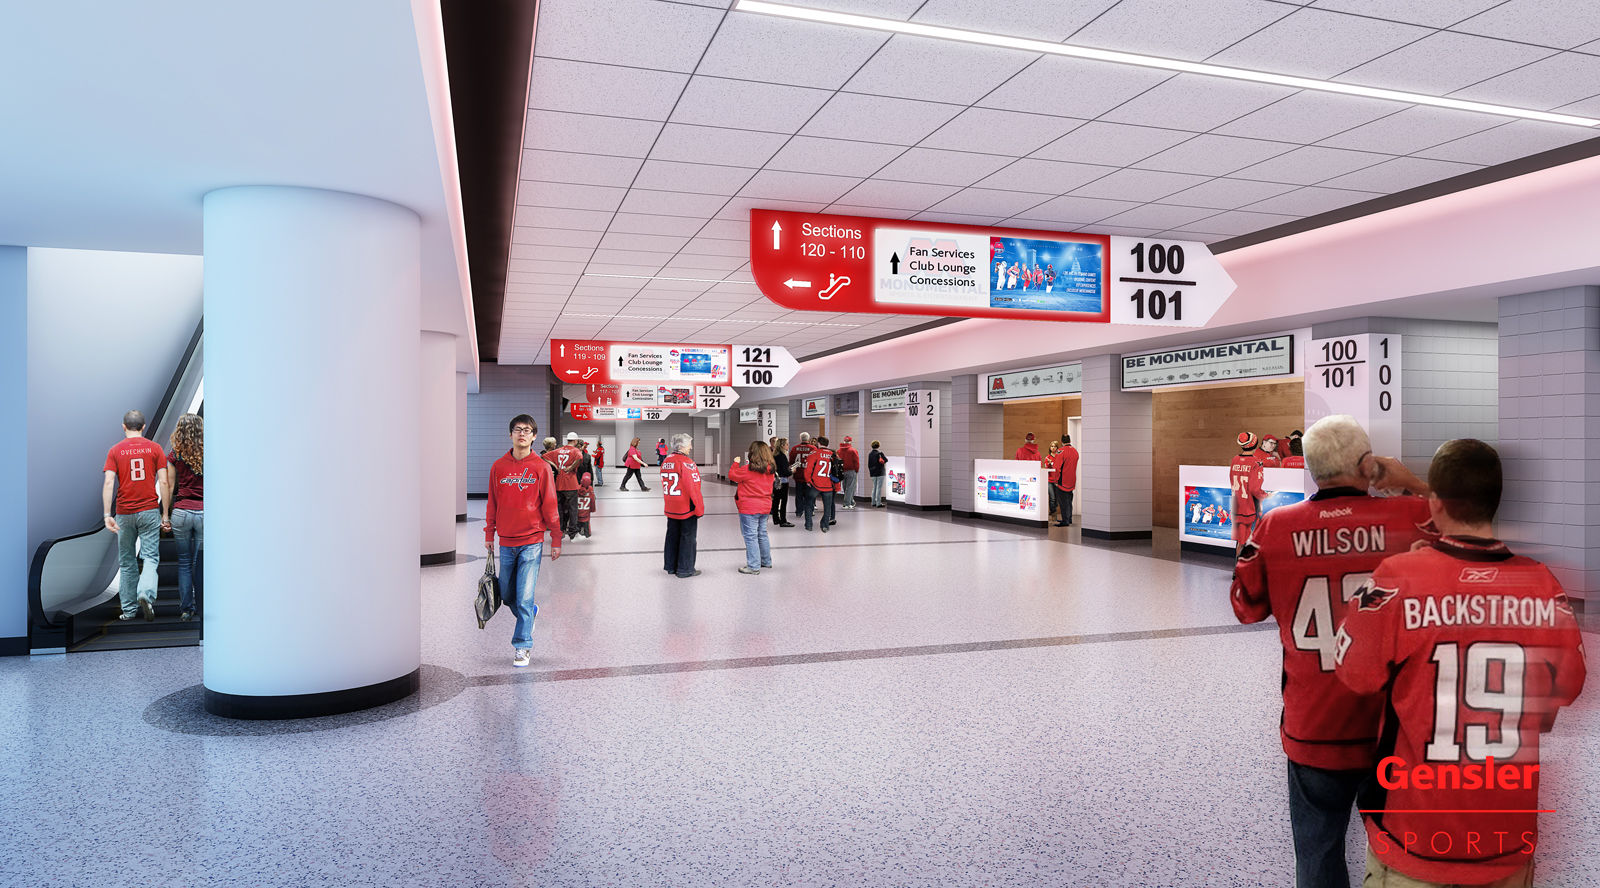 In addition to the renovated concourses, improvements will include padded seats with cup holders throughout the arena beginning in the Capitals and Wizards 2018-2019 season and a new sound system. (Courtesy Gensler Sports)